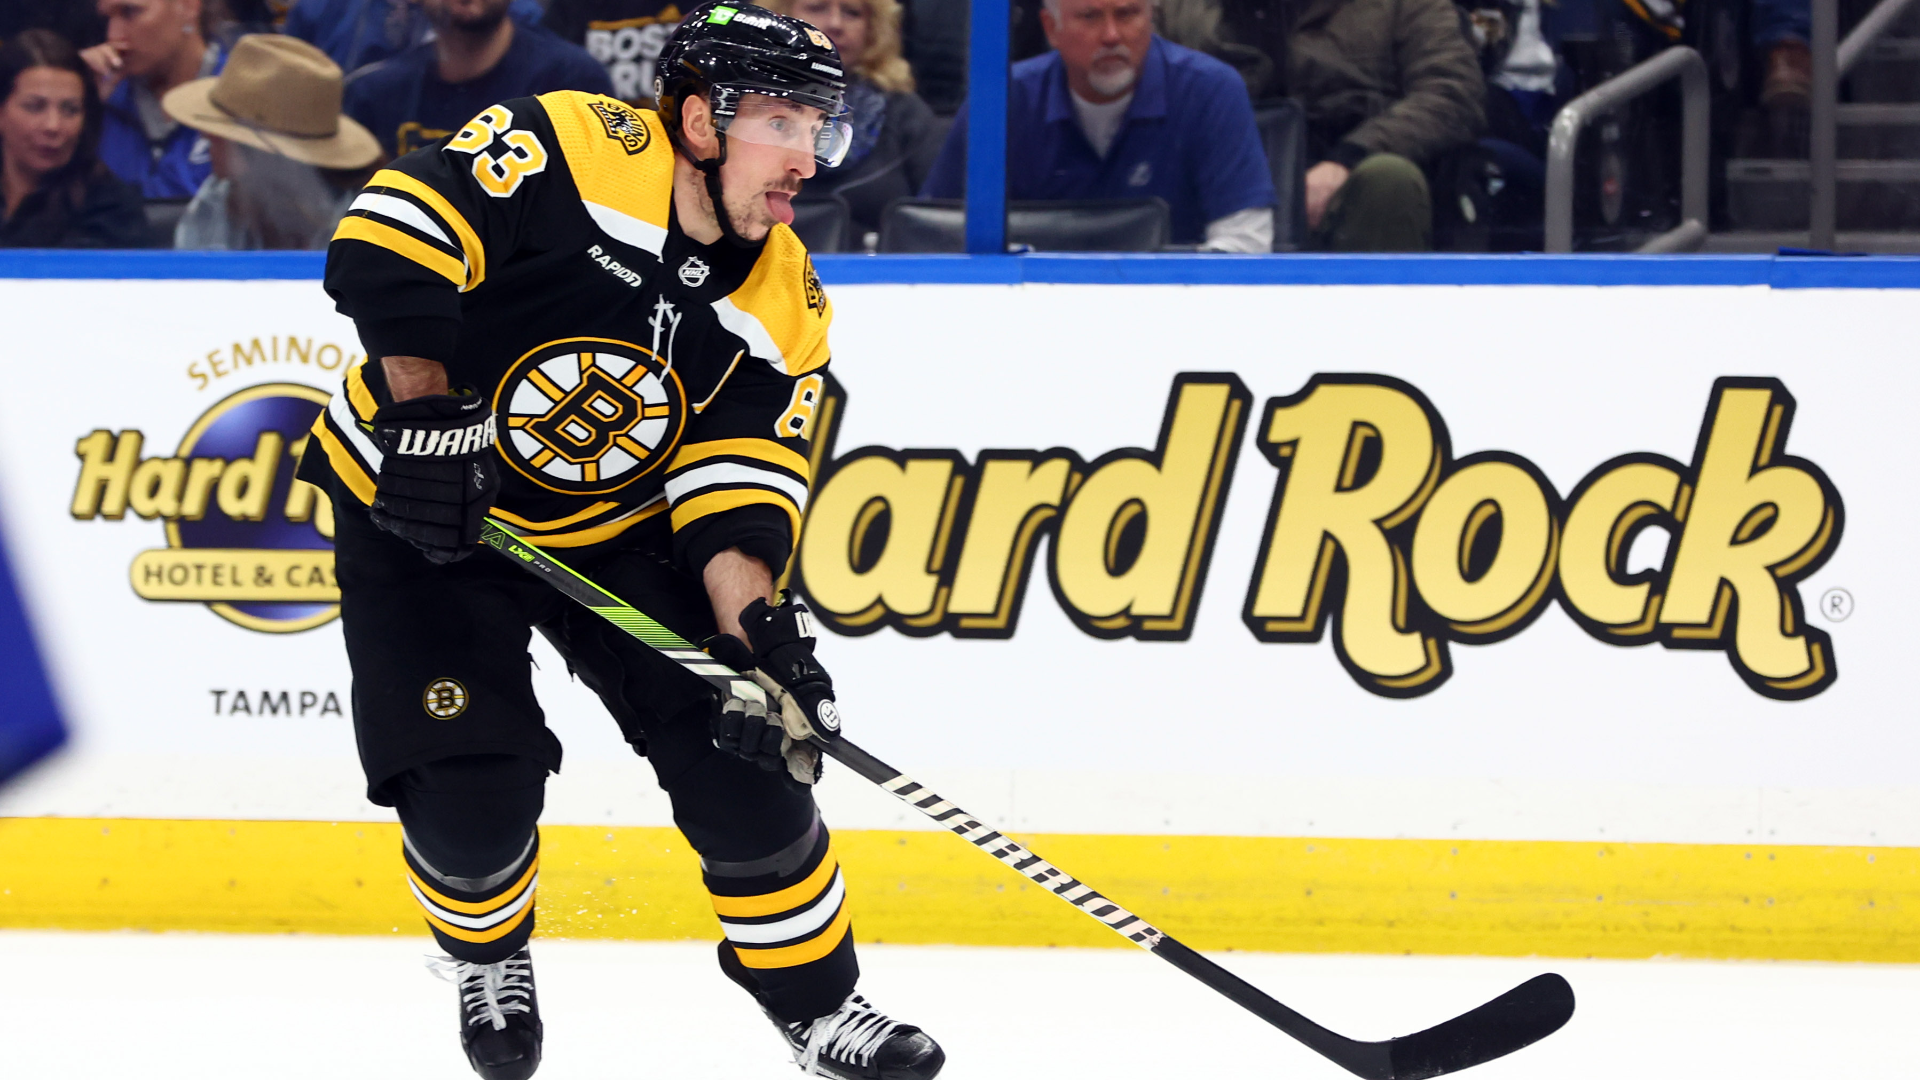 For Brad Marchand, seeing his jersey with captain's 'C' was overwhelming